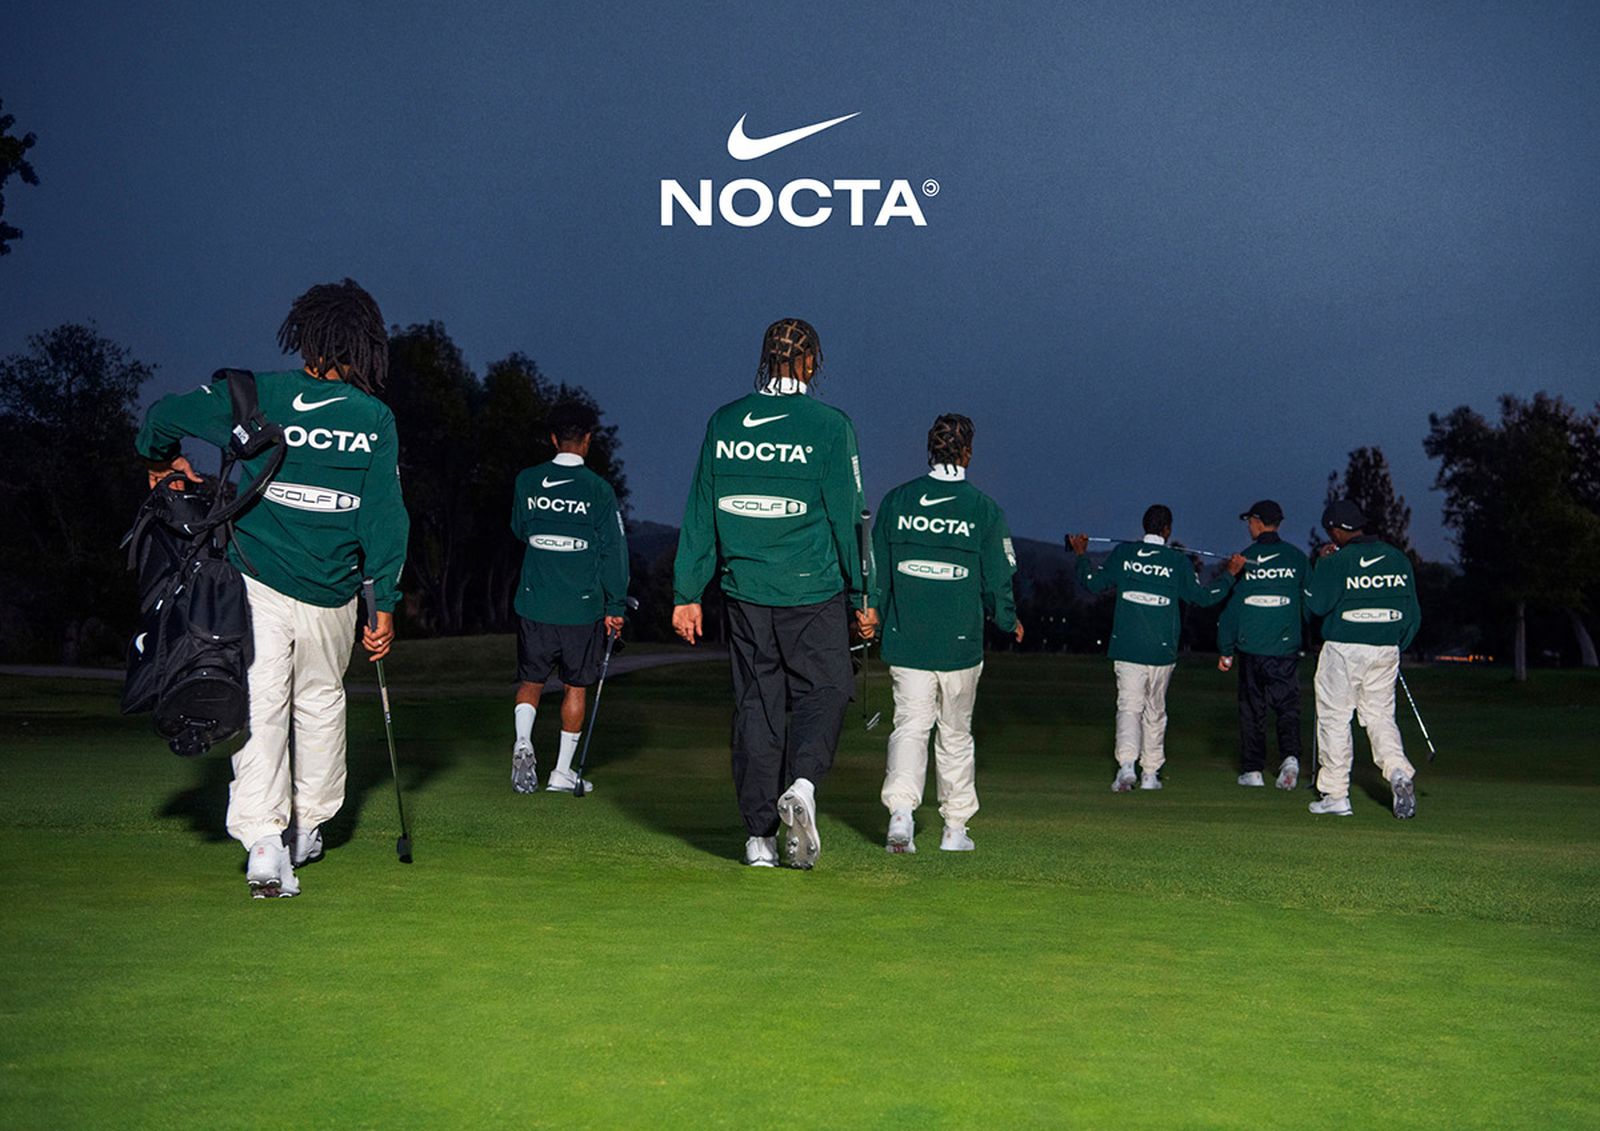 Drake x Nike NOCTA Golf Collection Release Info